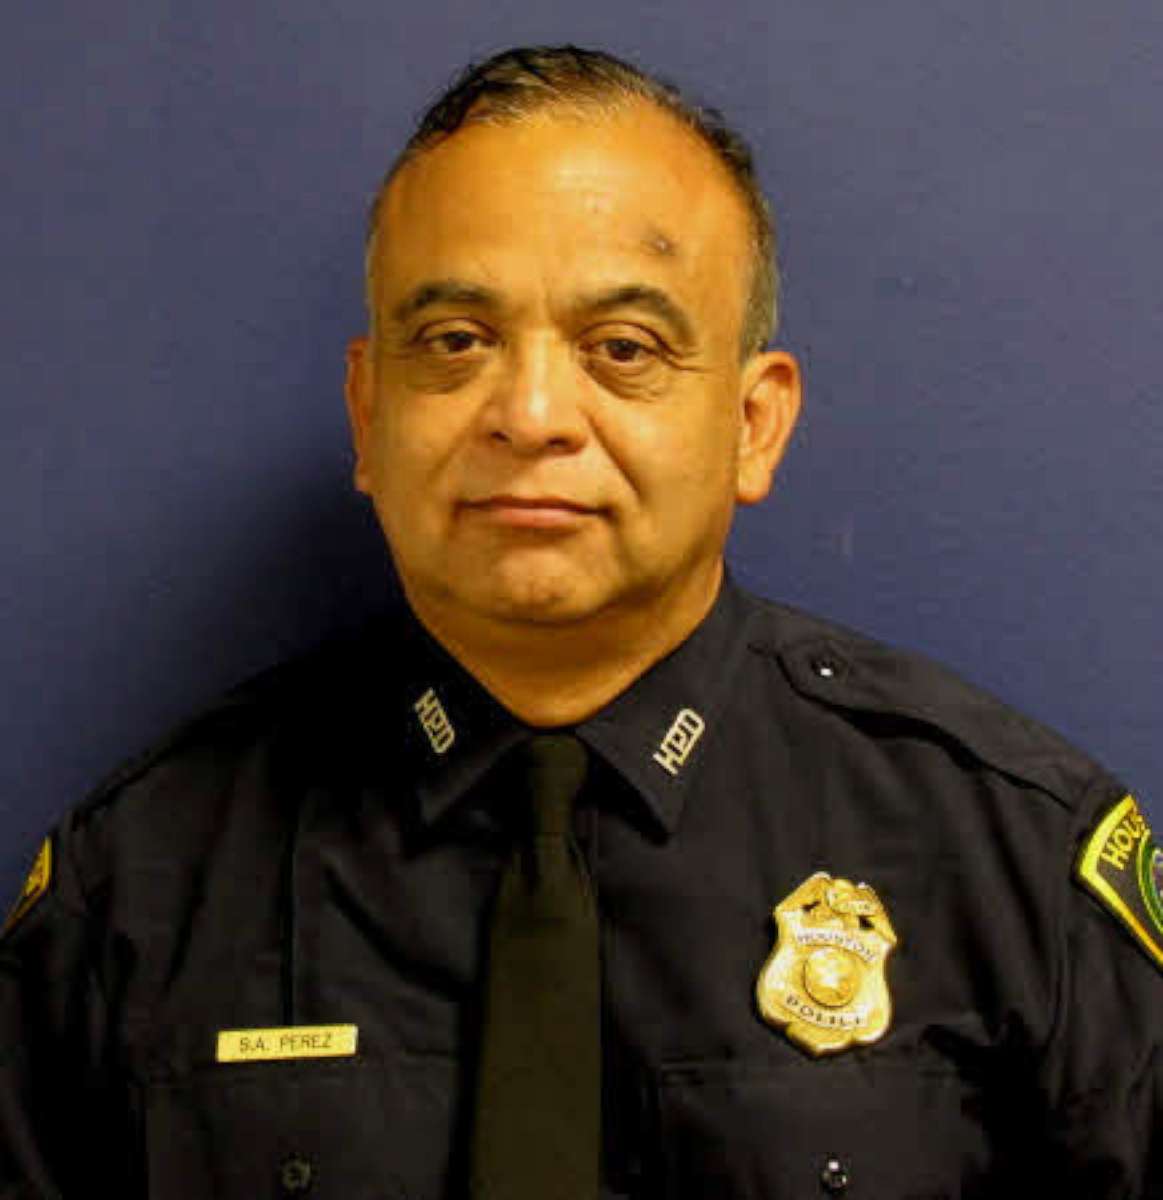 PHOTO: Sgt. Steve Perez, 60, pictured, drowned in floodwaters on his way to work, Houston Police Chief Ace Acevedo said at a press conference, Aug. 29, 2017.